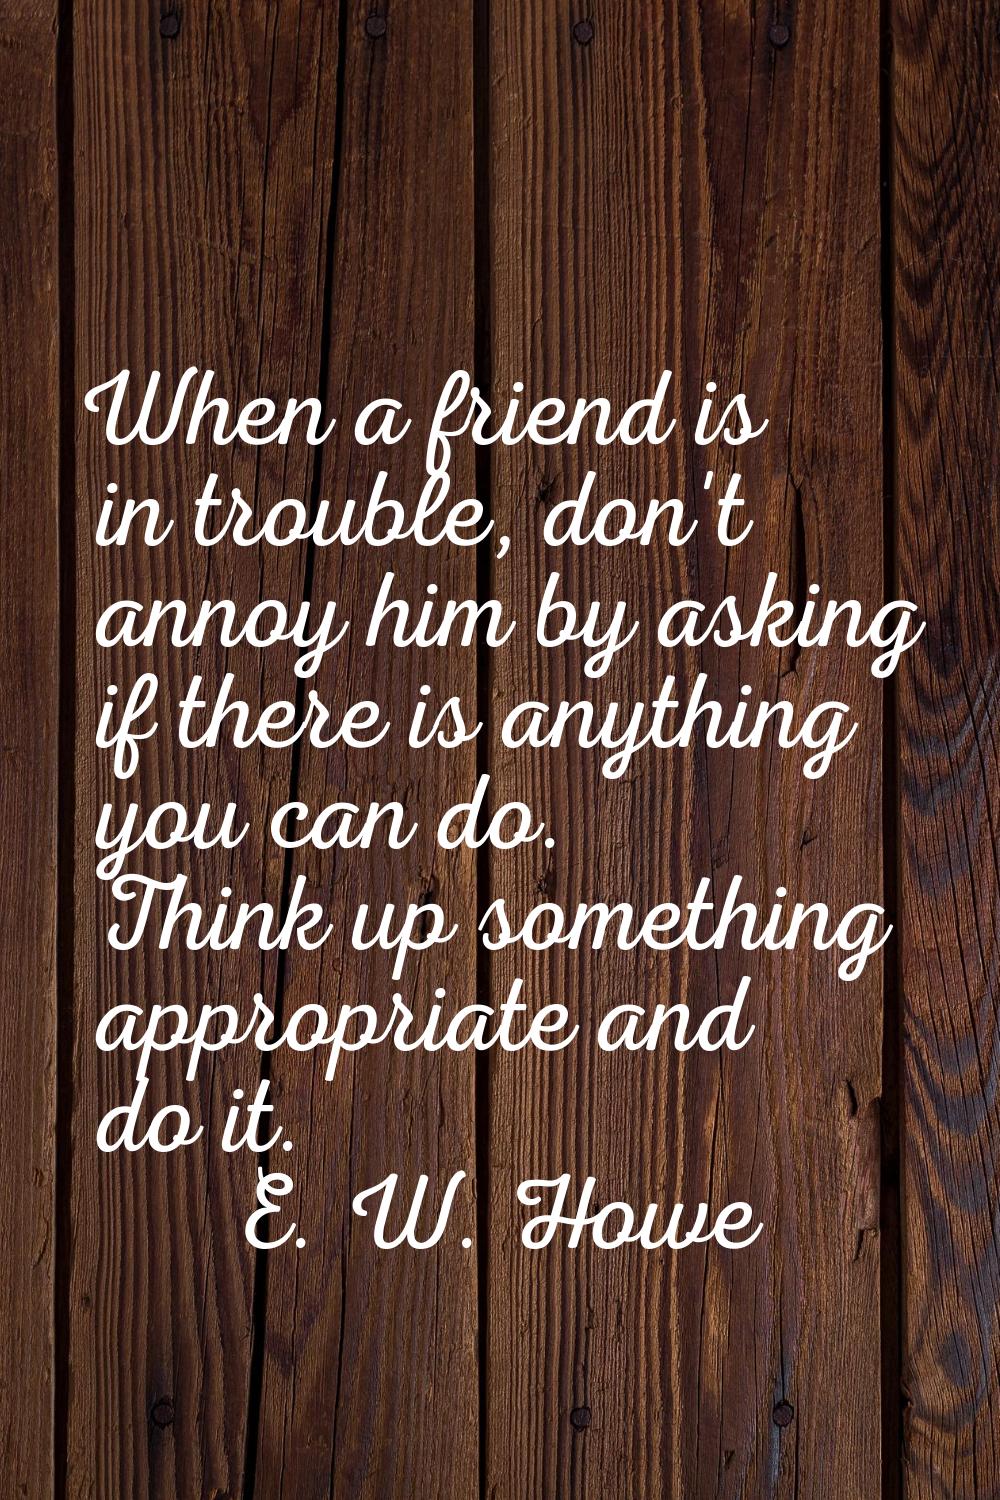 When a friend is in trouble, don't annoy him by asking if there is anything you can do. Think up so